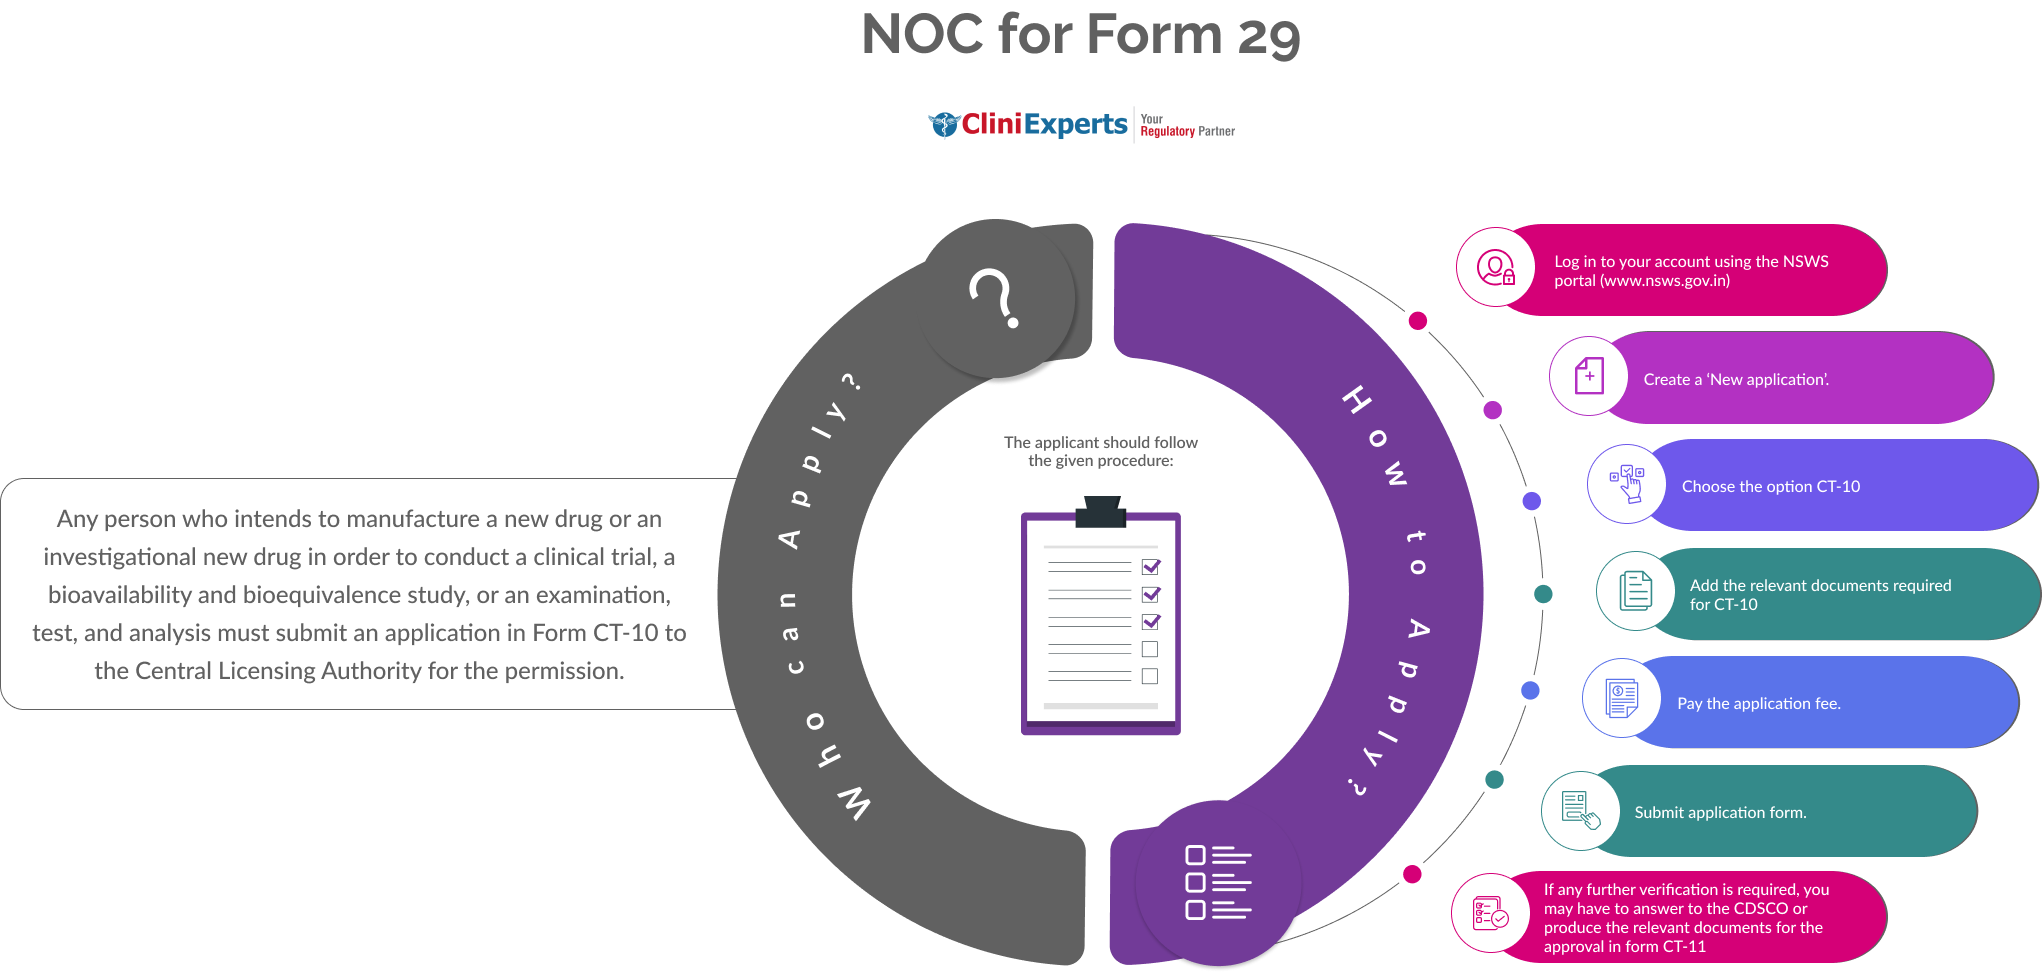 NOC for Form 29